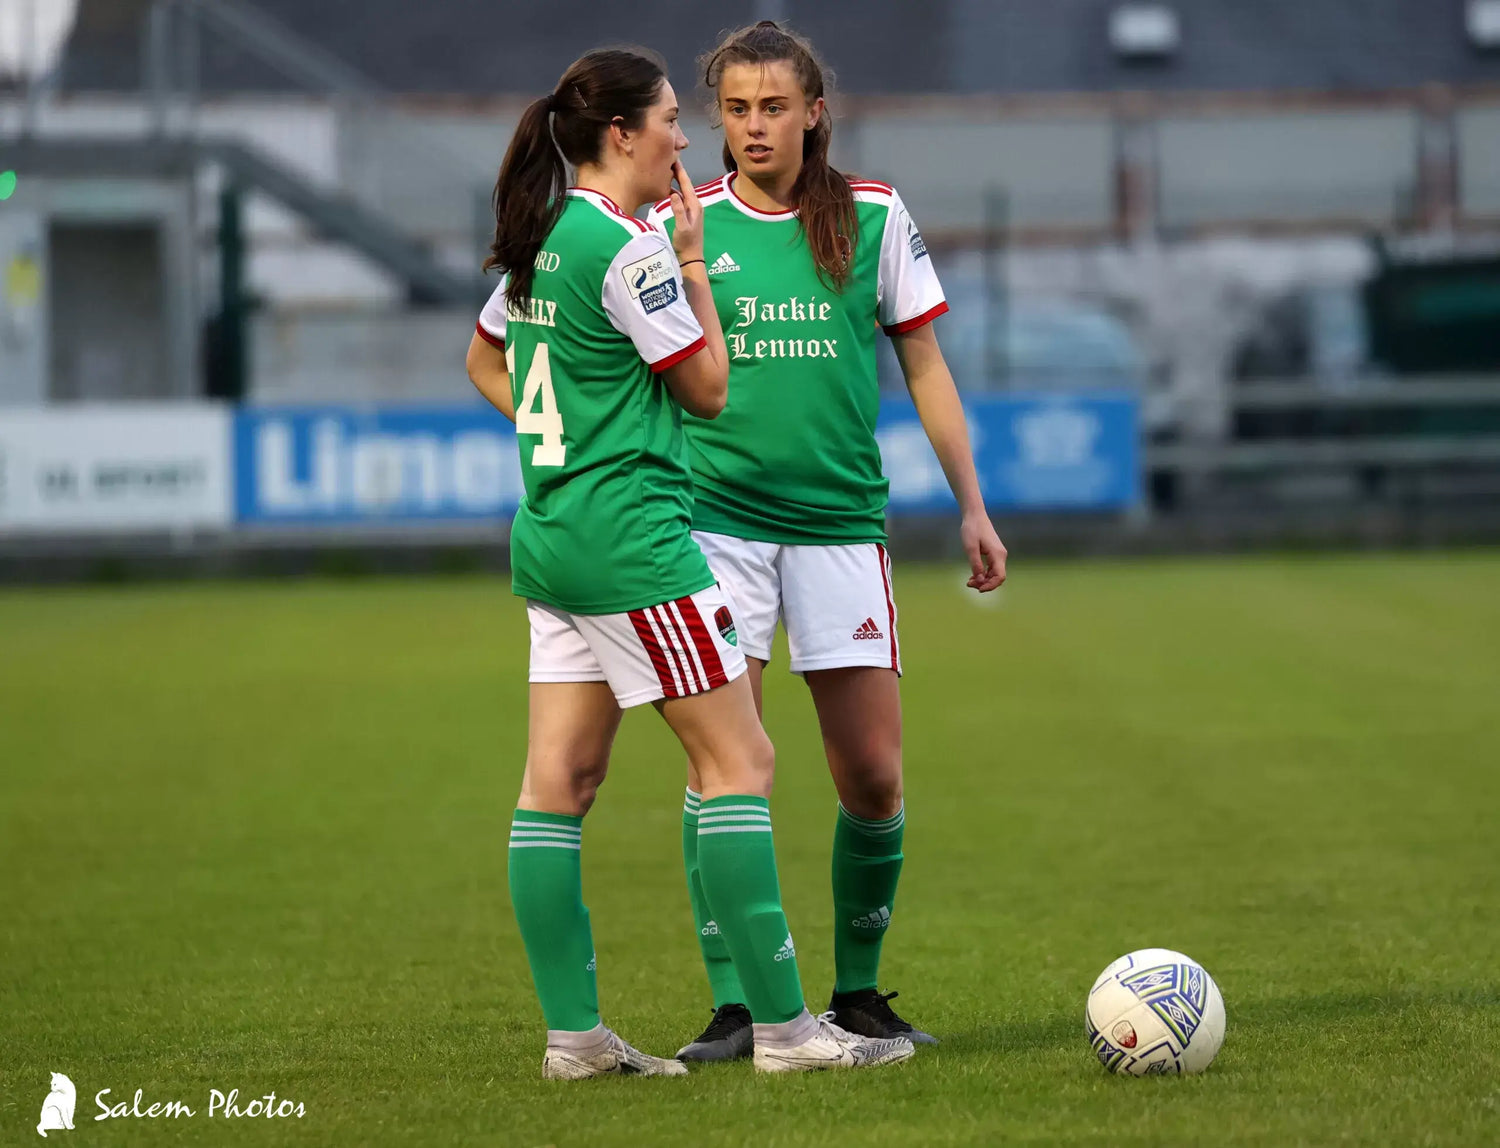 WNL Preview: City vs Wexford Youths